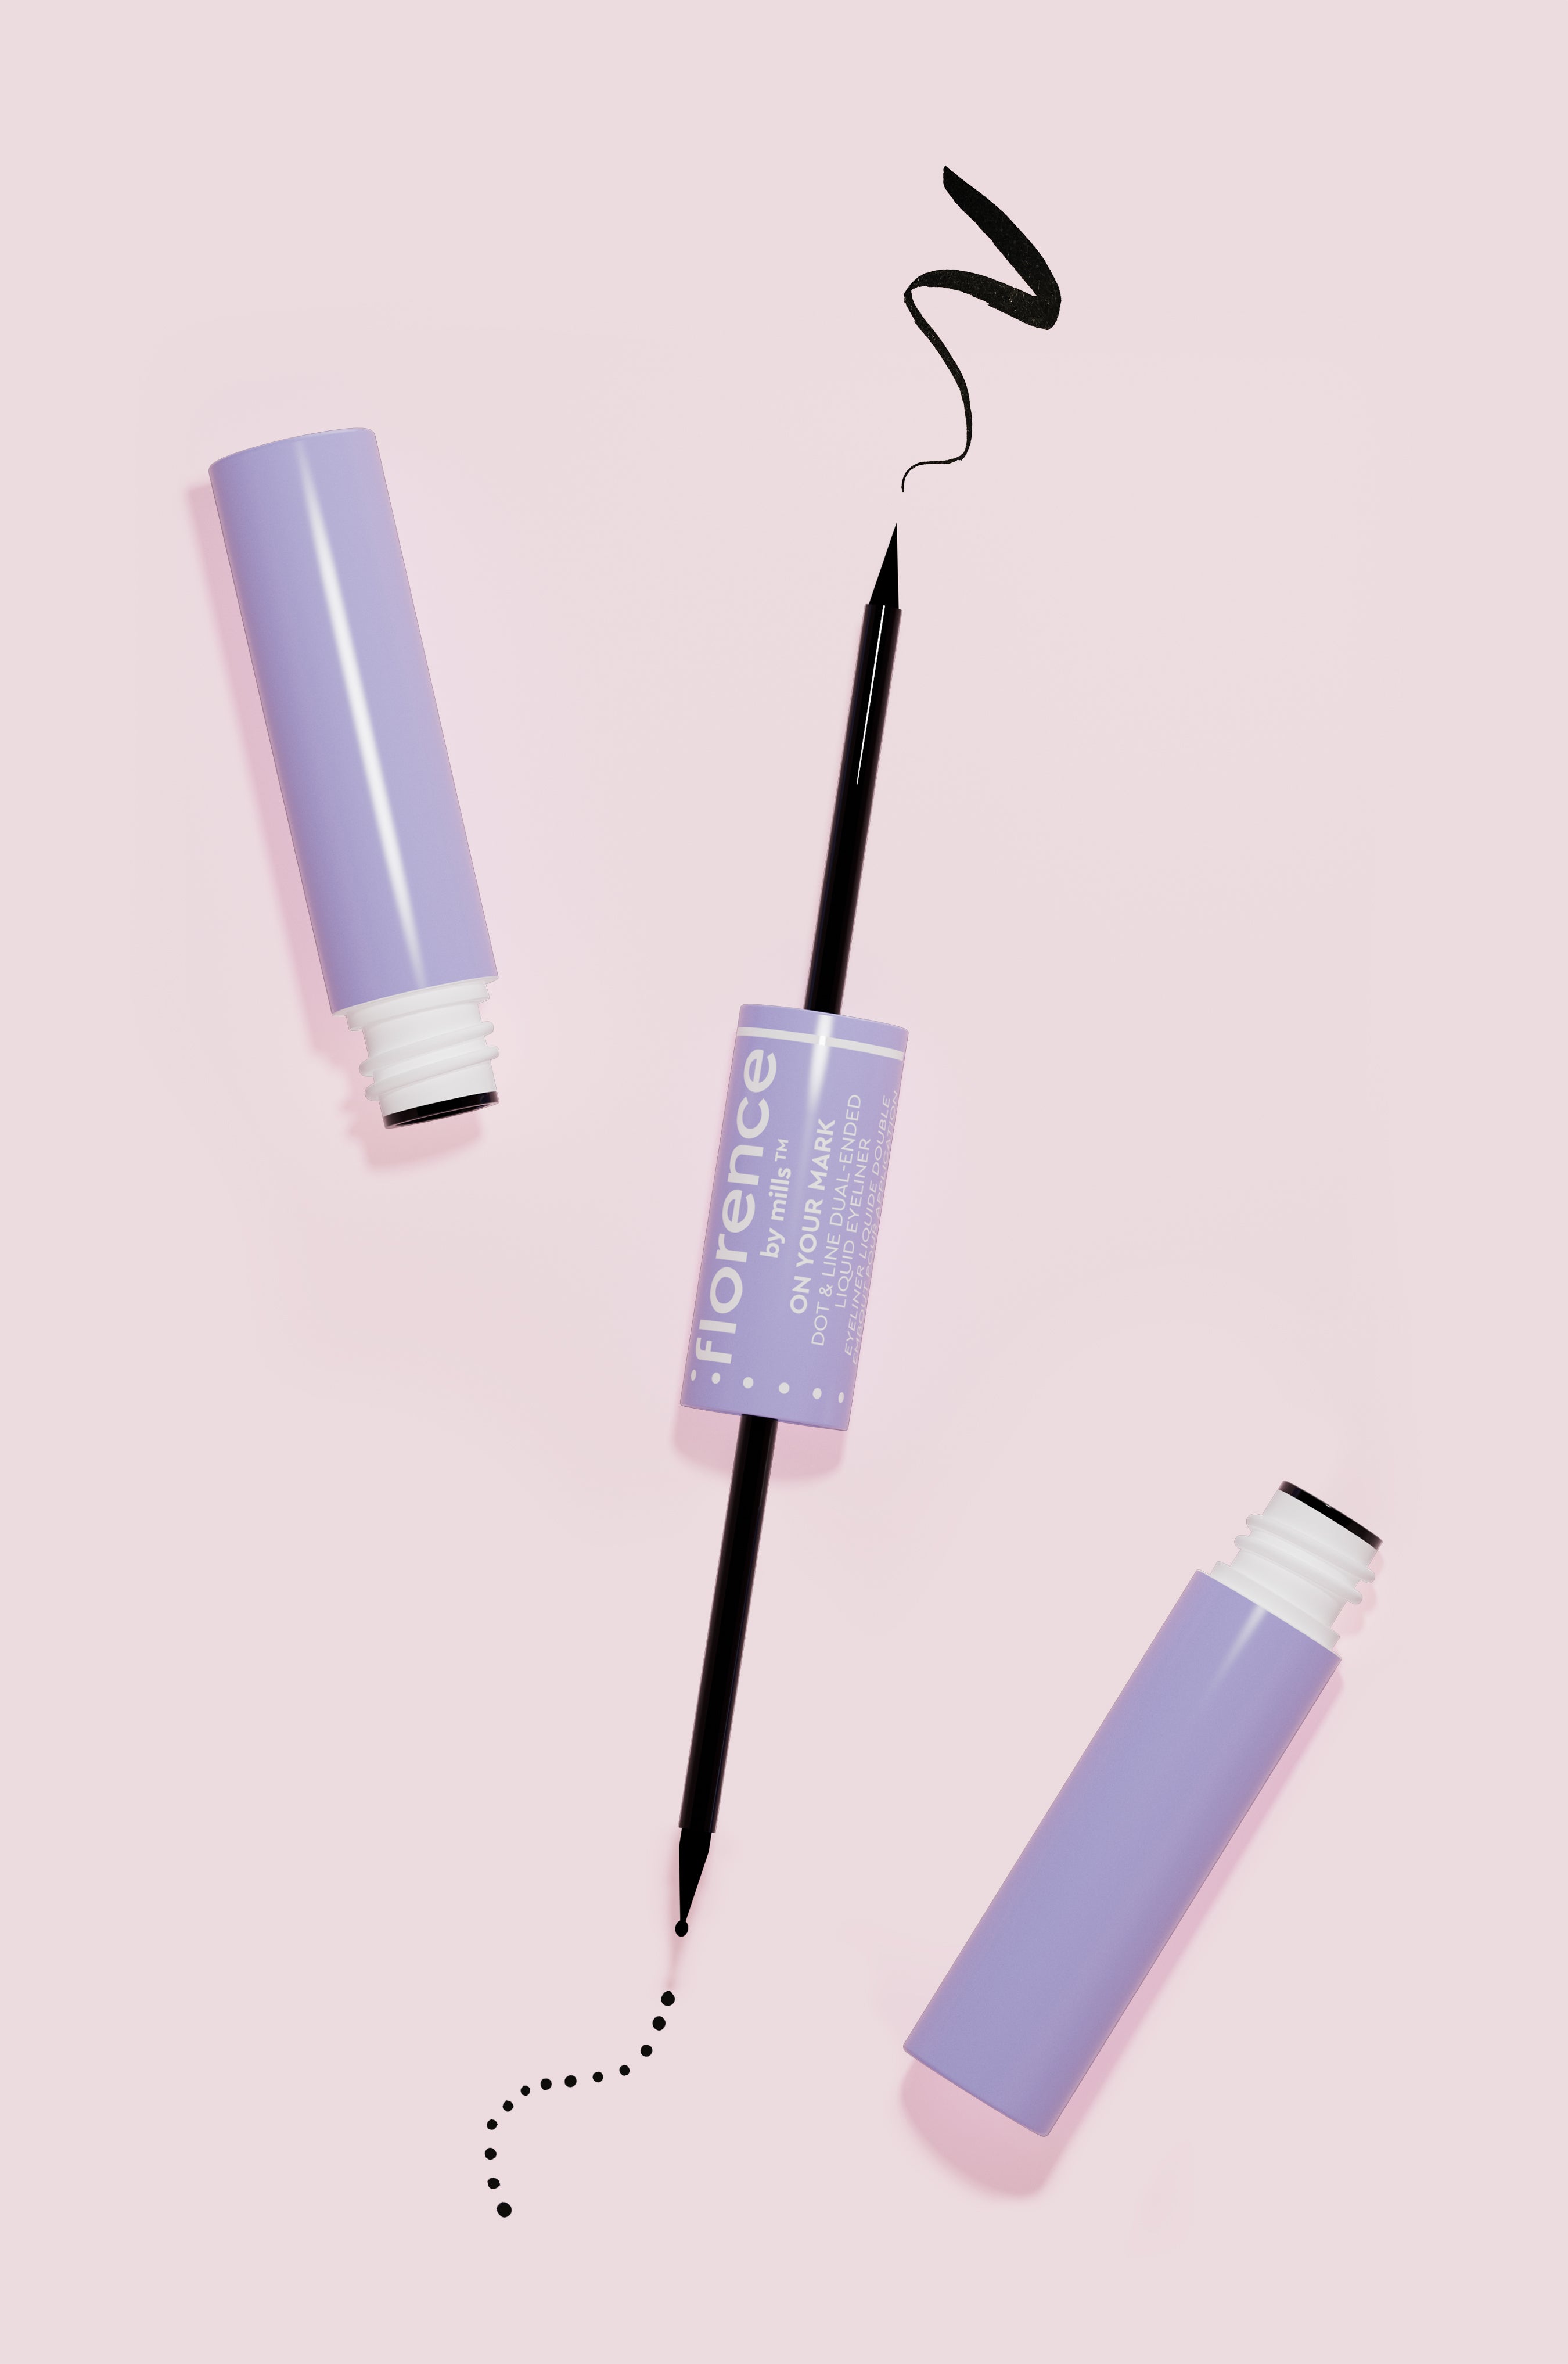 On Your Mark Dot by mills by – Line | & Dual-Ended Eyeliner mills beauty florence florence Liquid